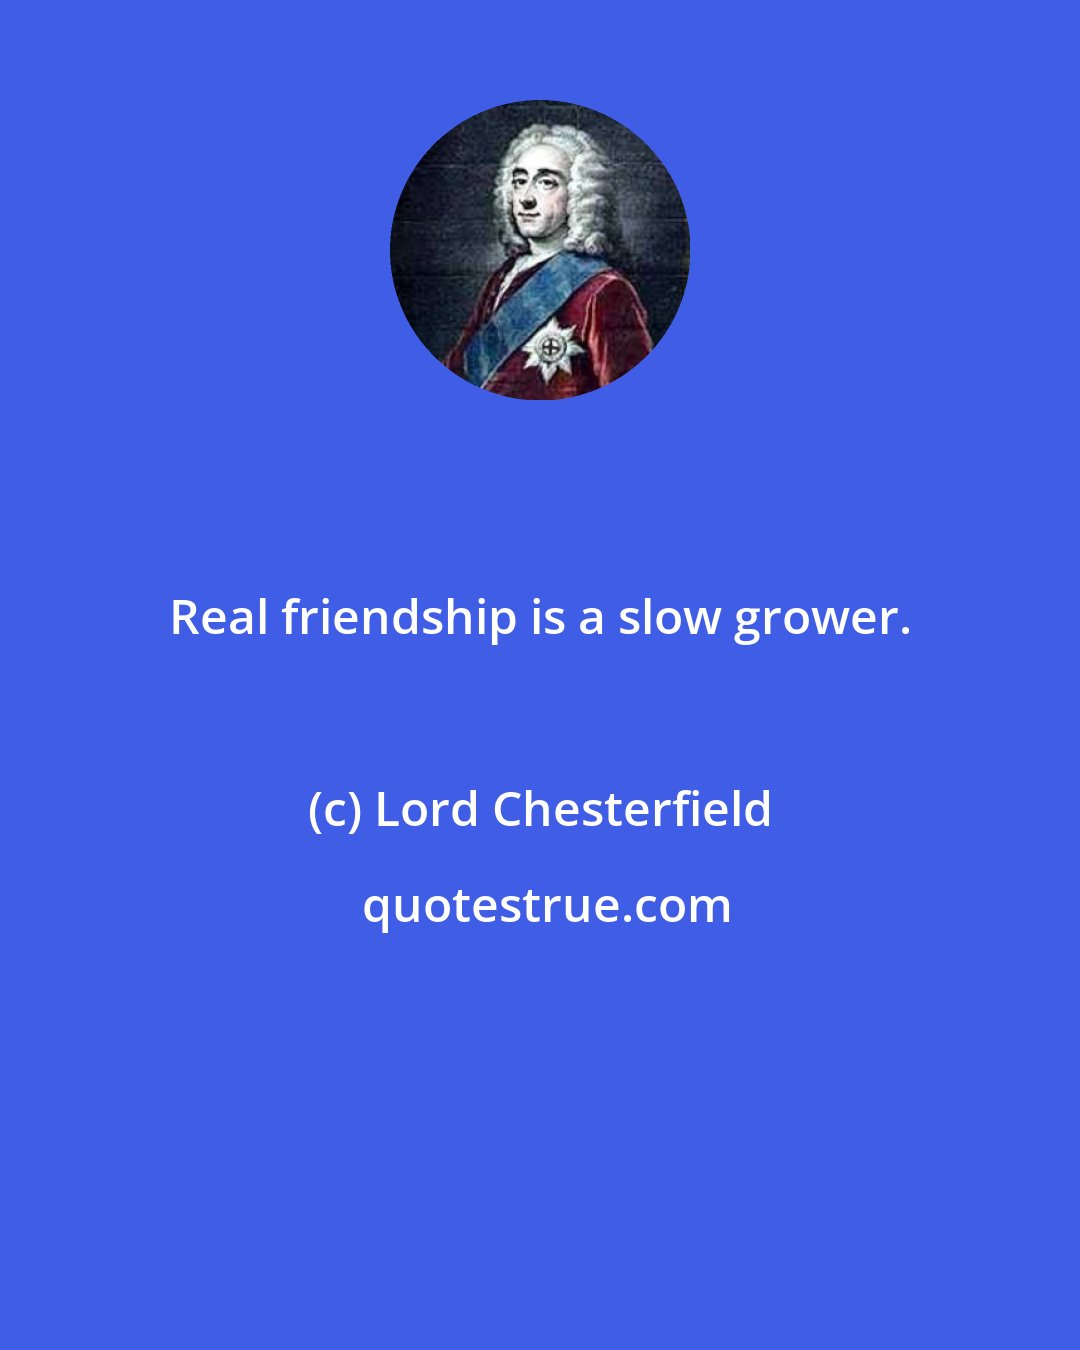 Lord Chesterfield: Real friendship is a slow grower.